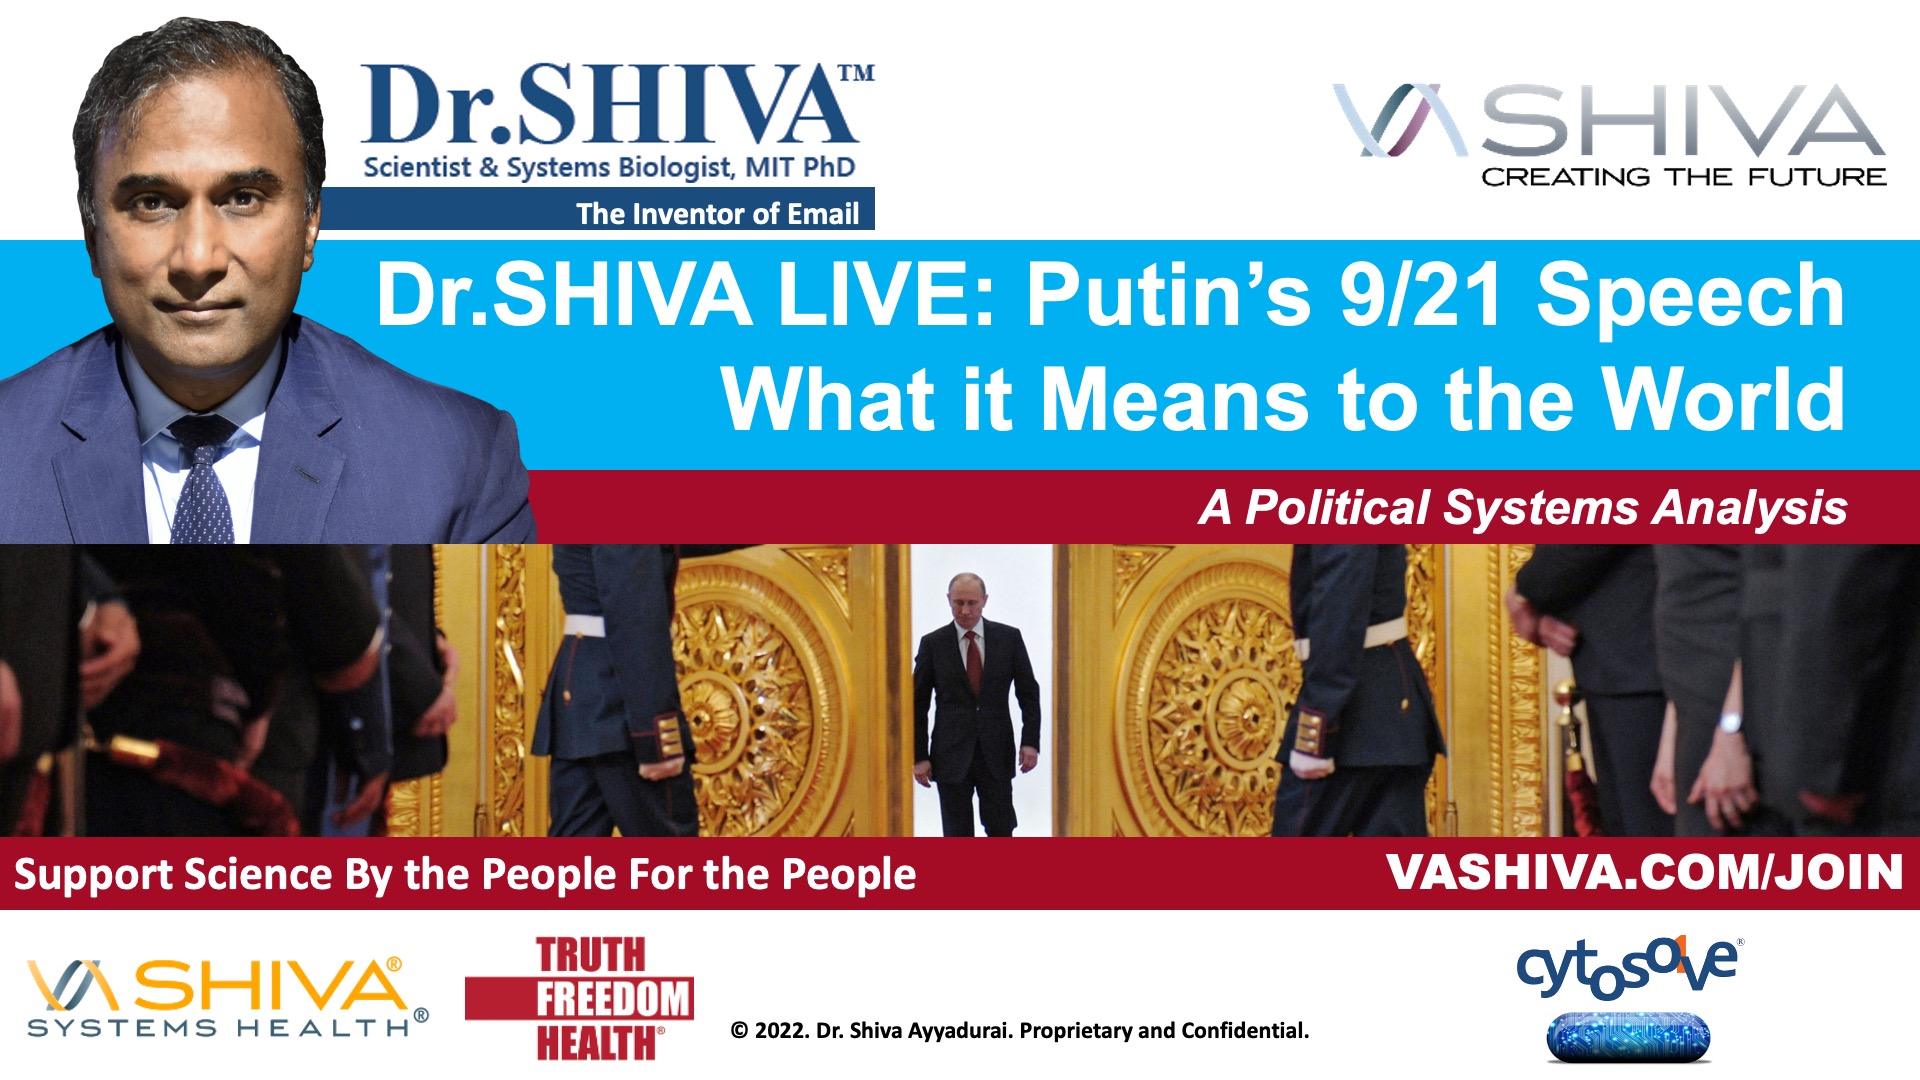 Dr.SHIVA LIVE: Putin’s 9/21 Speech - What it Means to the World